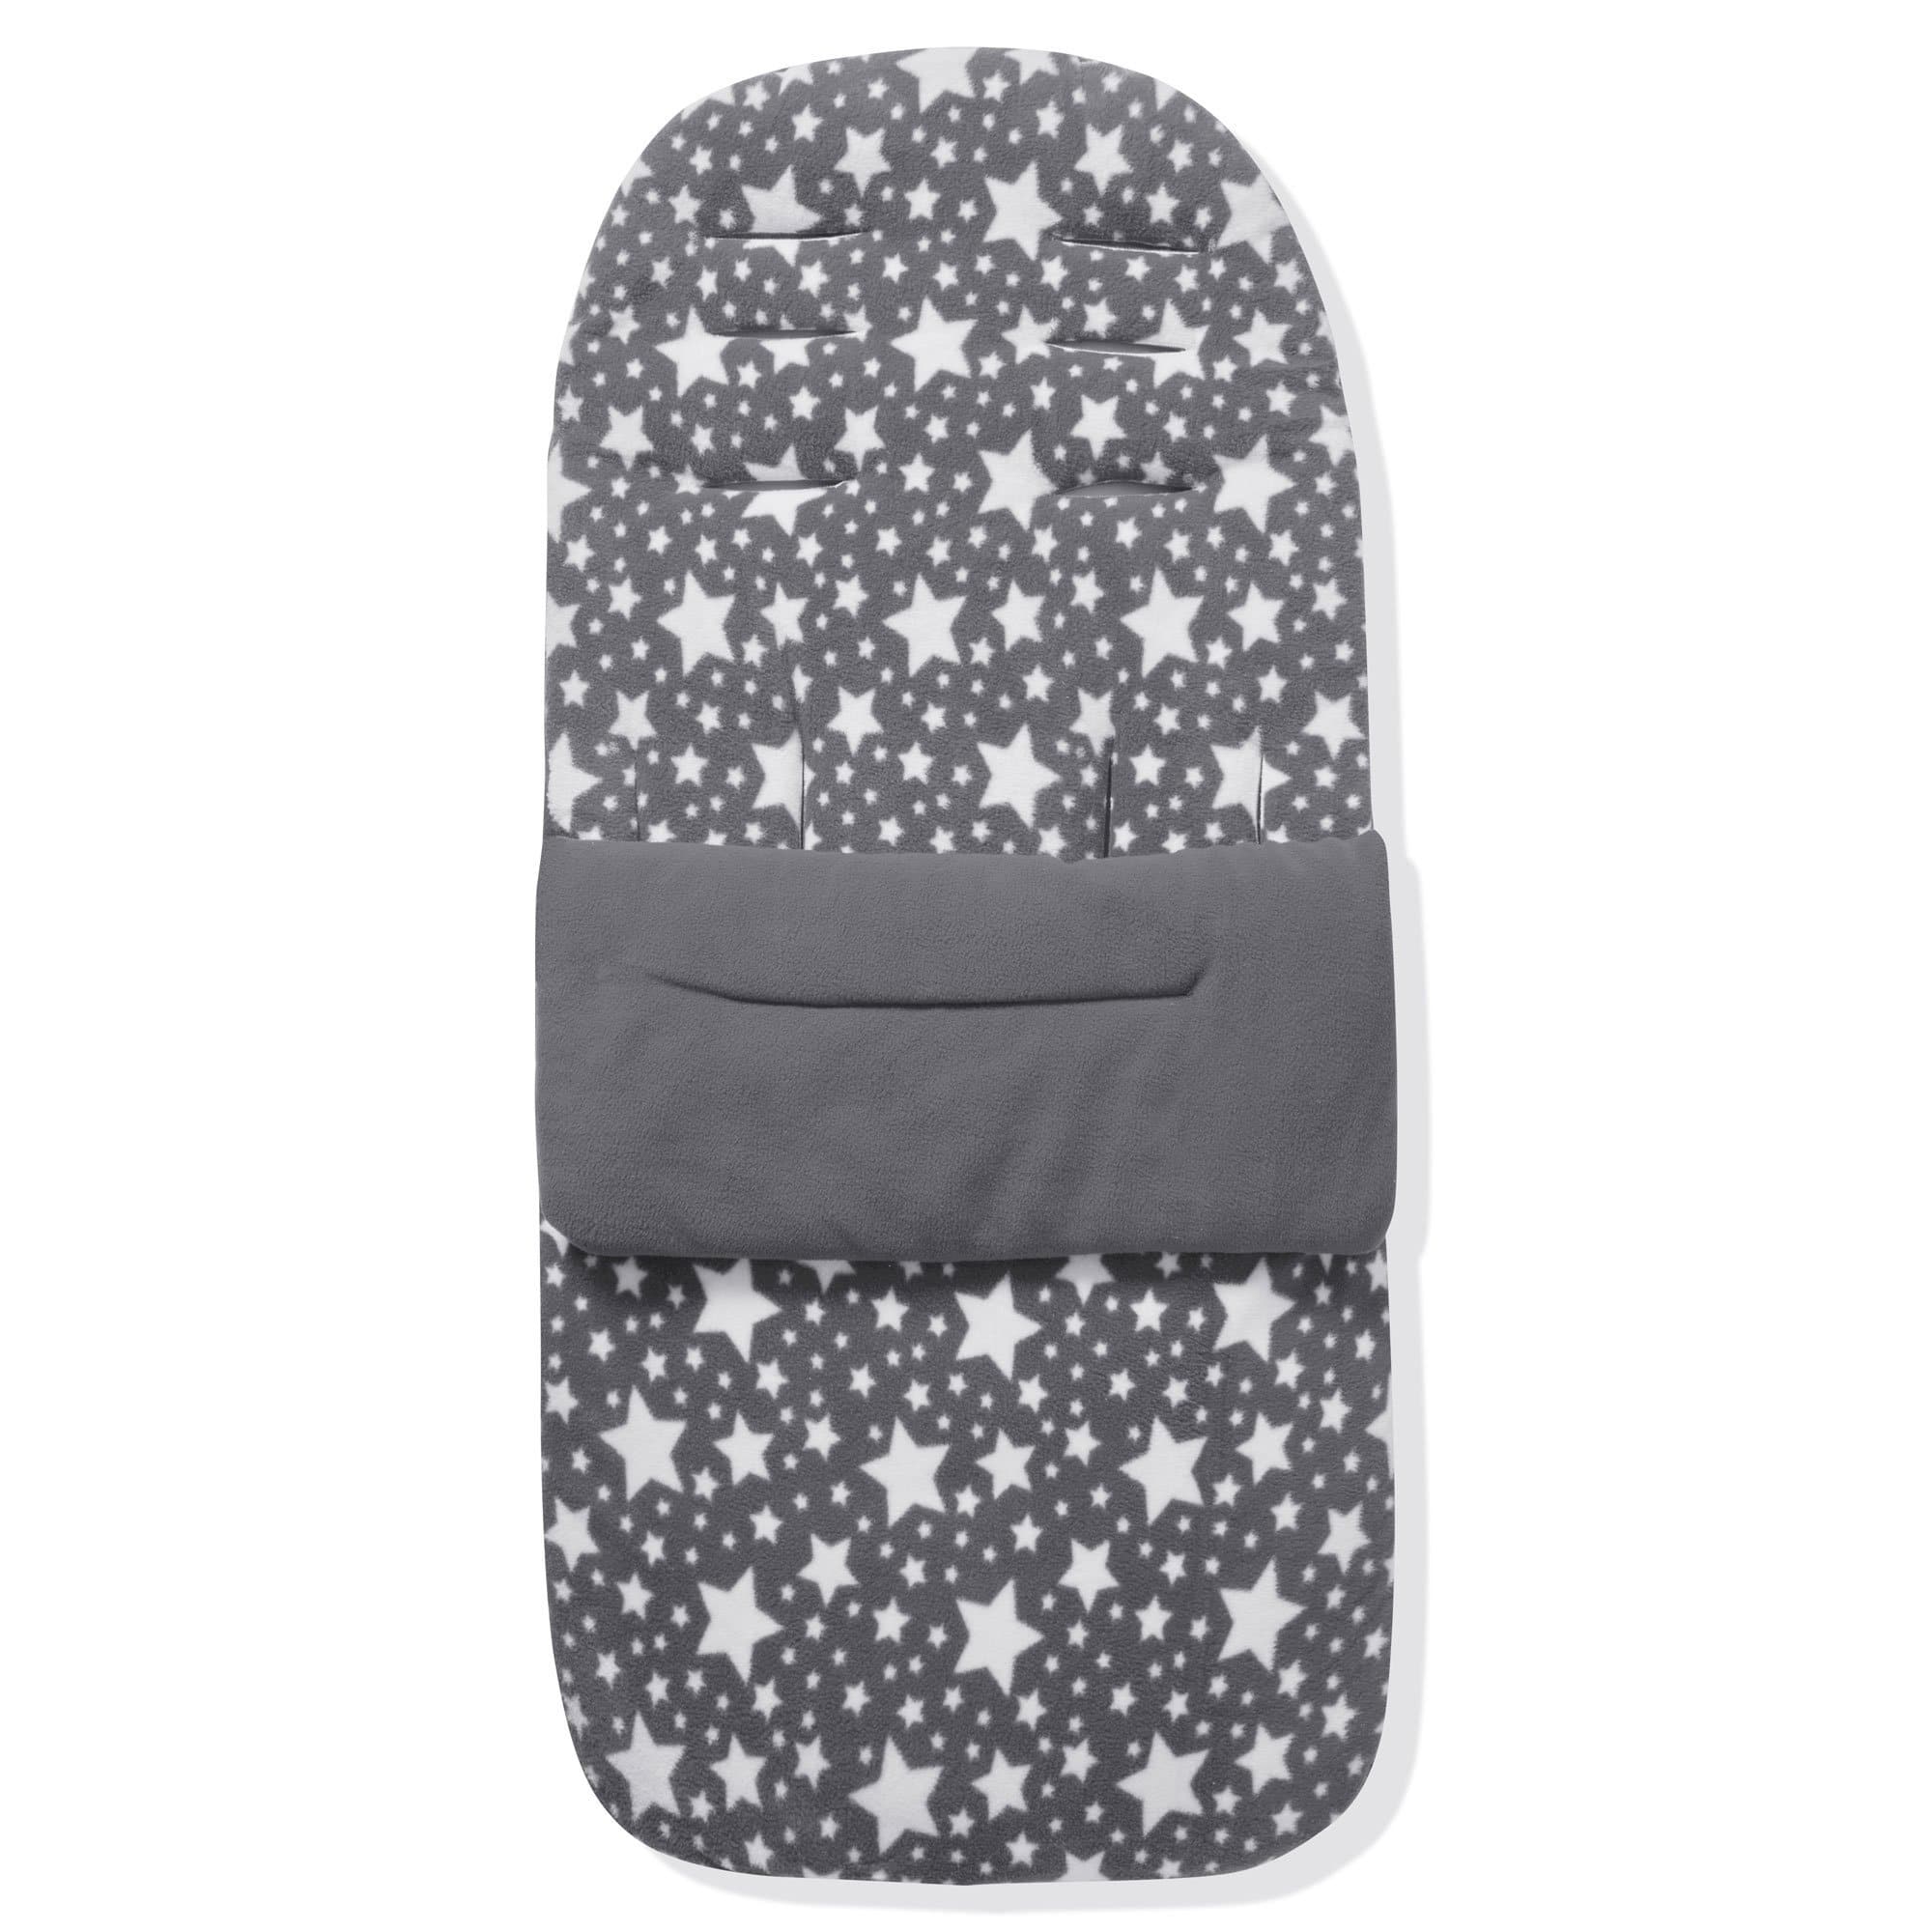 Fleece Footmuff / Cosy Toes Compatible with Inglesina - For Your Little One